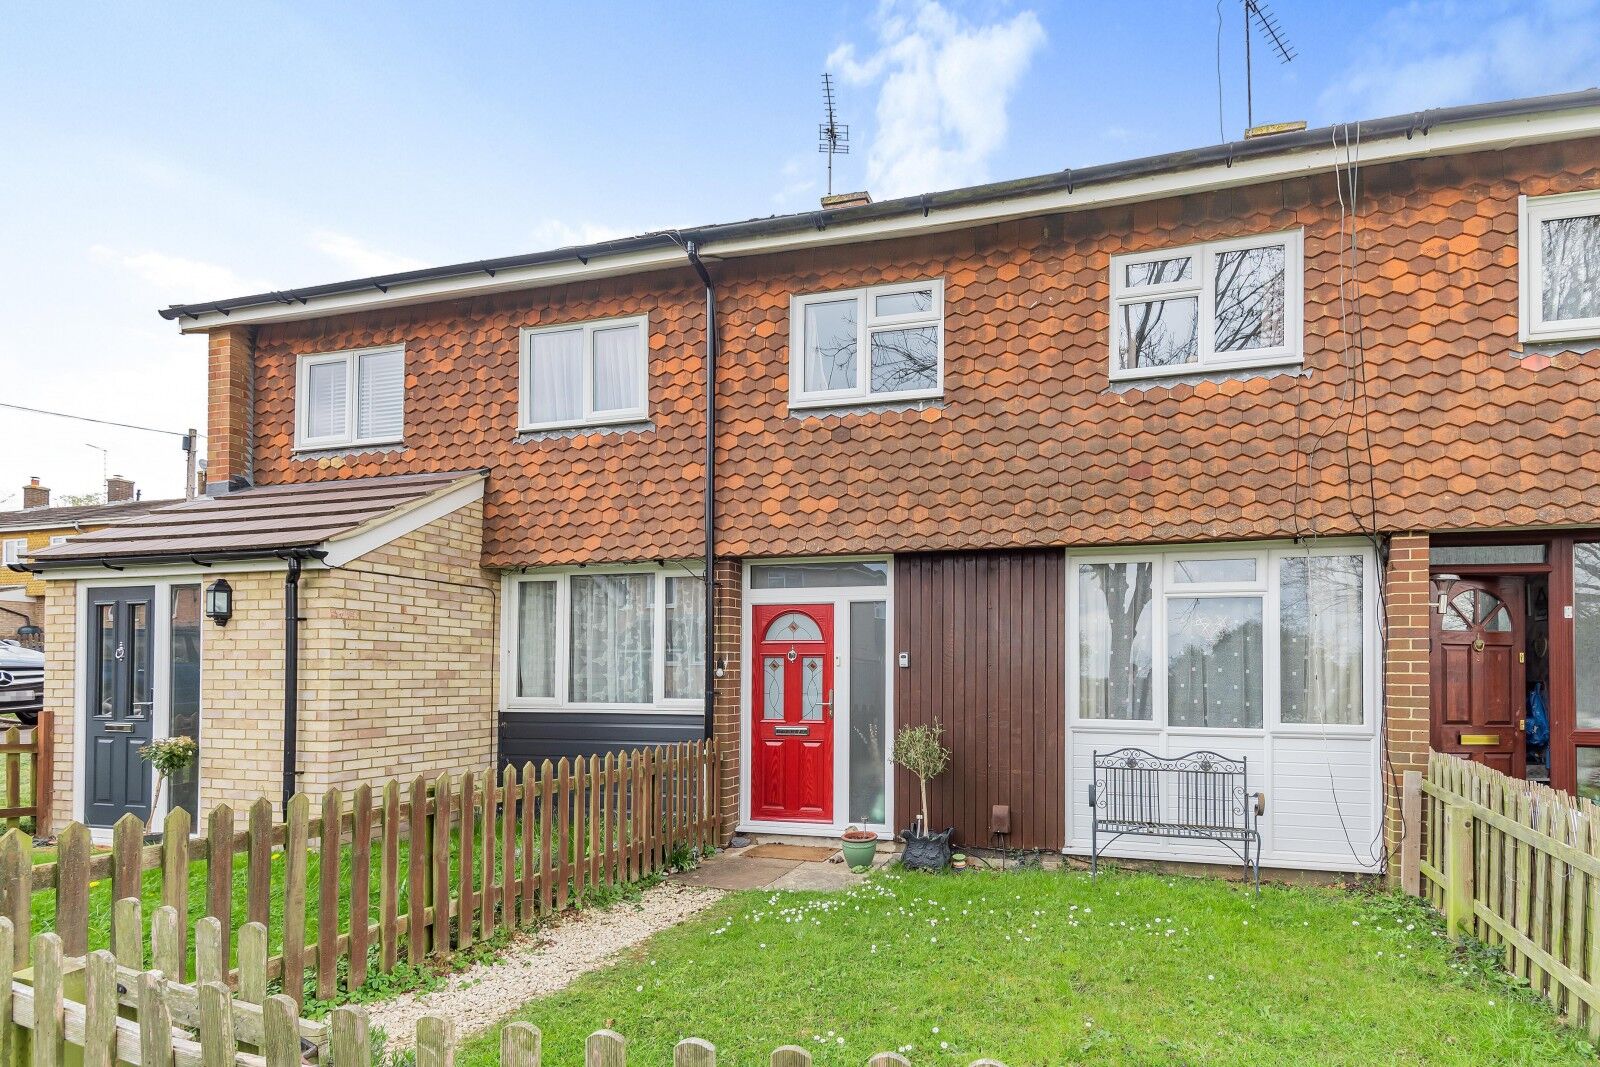 3 bedroom mid terraced house for sale Scott Close, Emmer Green, RG4, main image